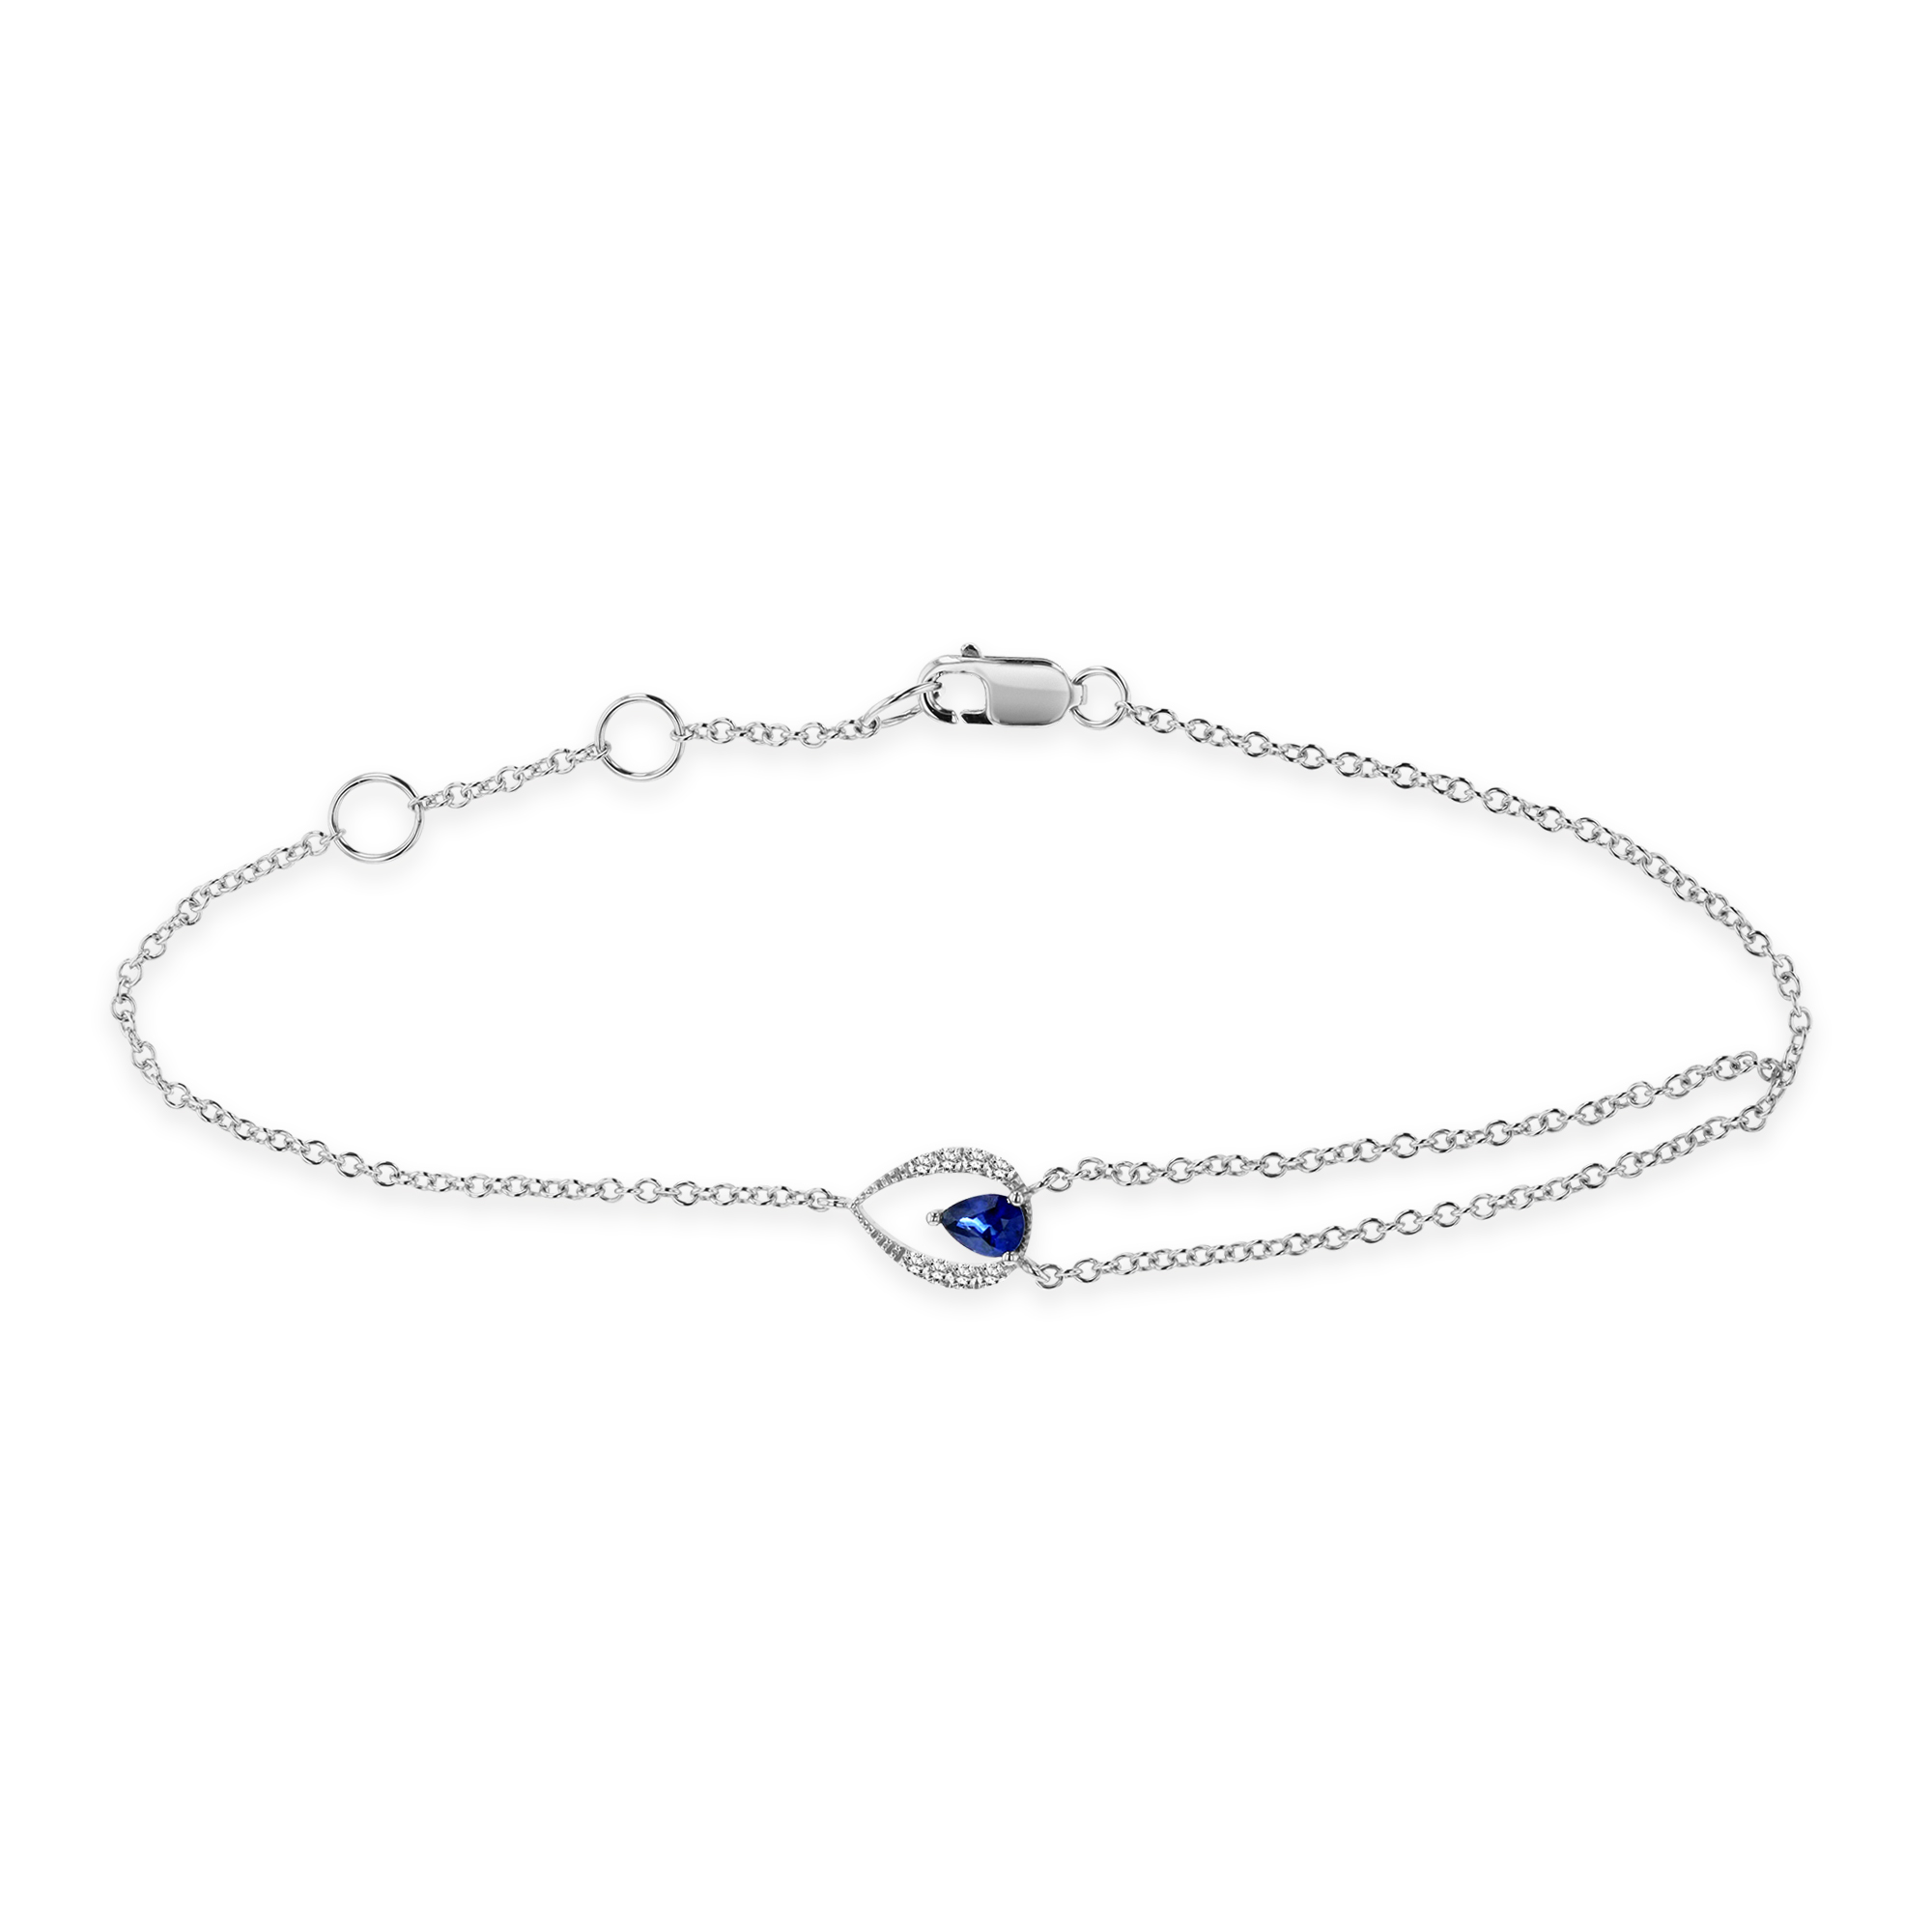 View 0.05ctw Diamond and Sapphire Bracelet in 14k Gold